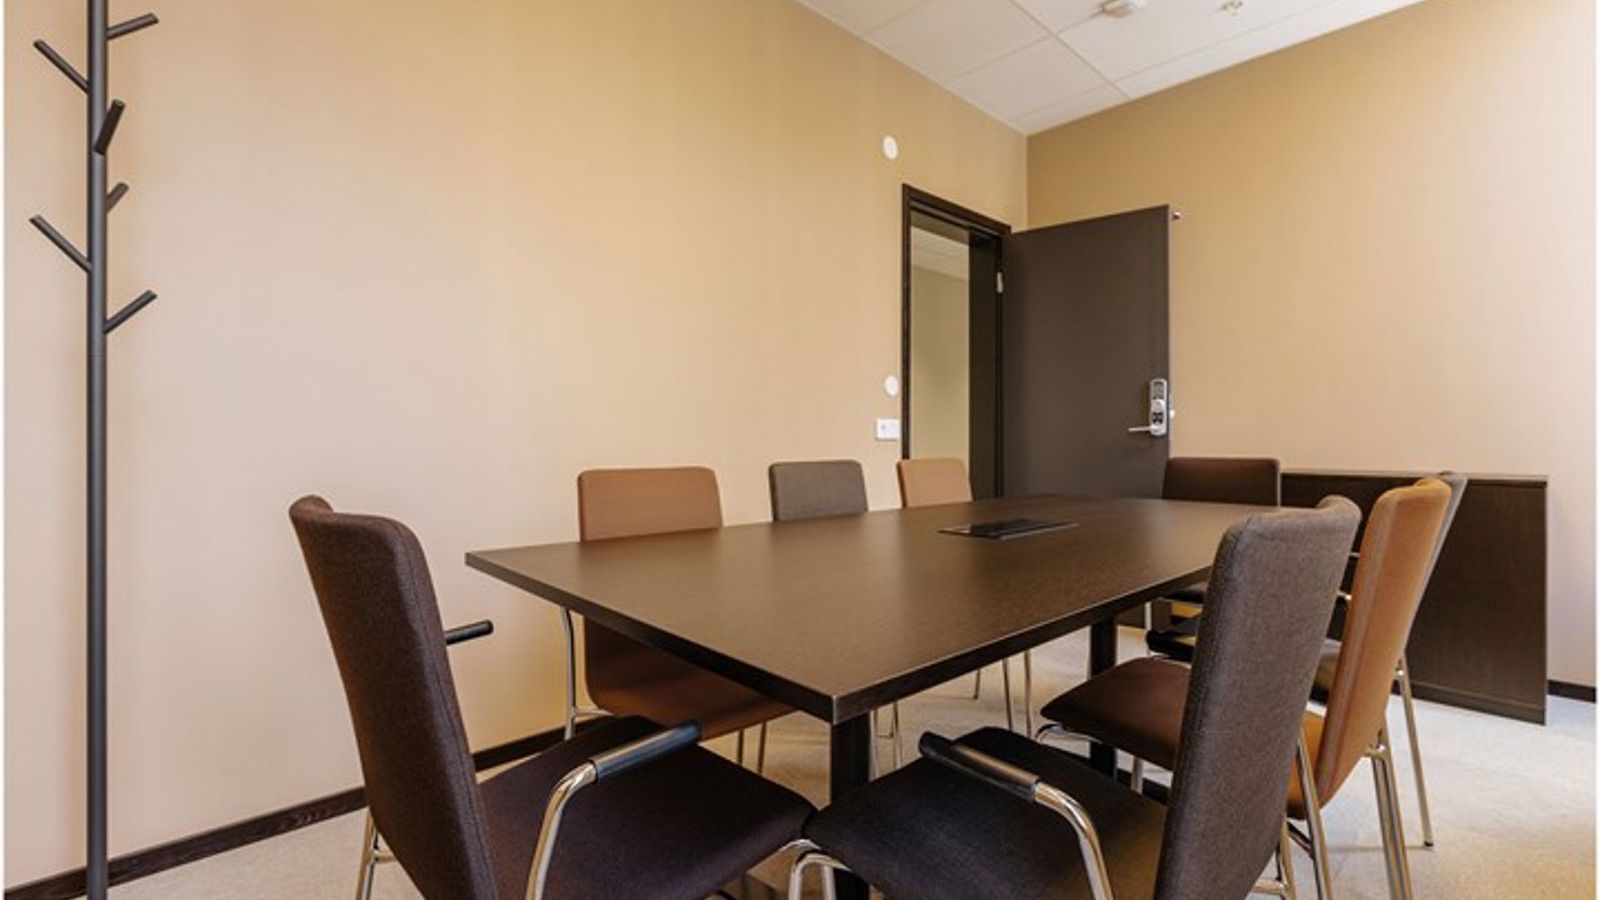 Conference room with board seating, brown table and brown chairs